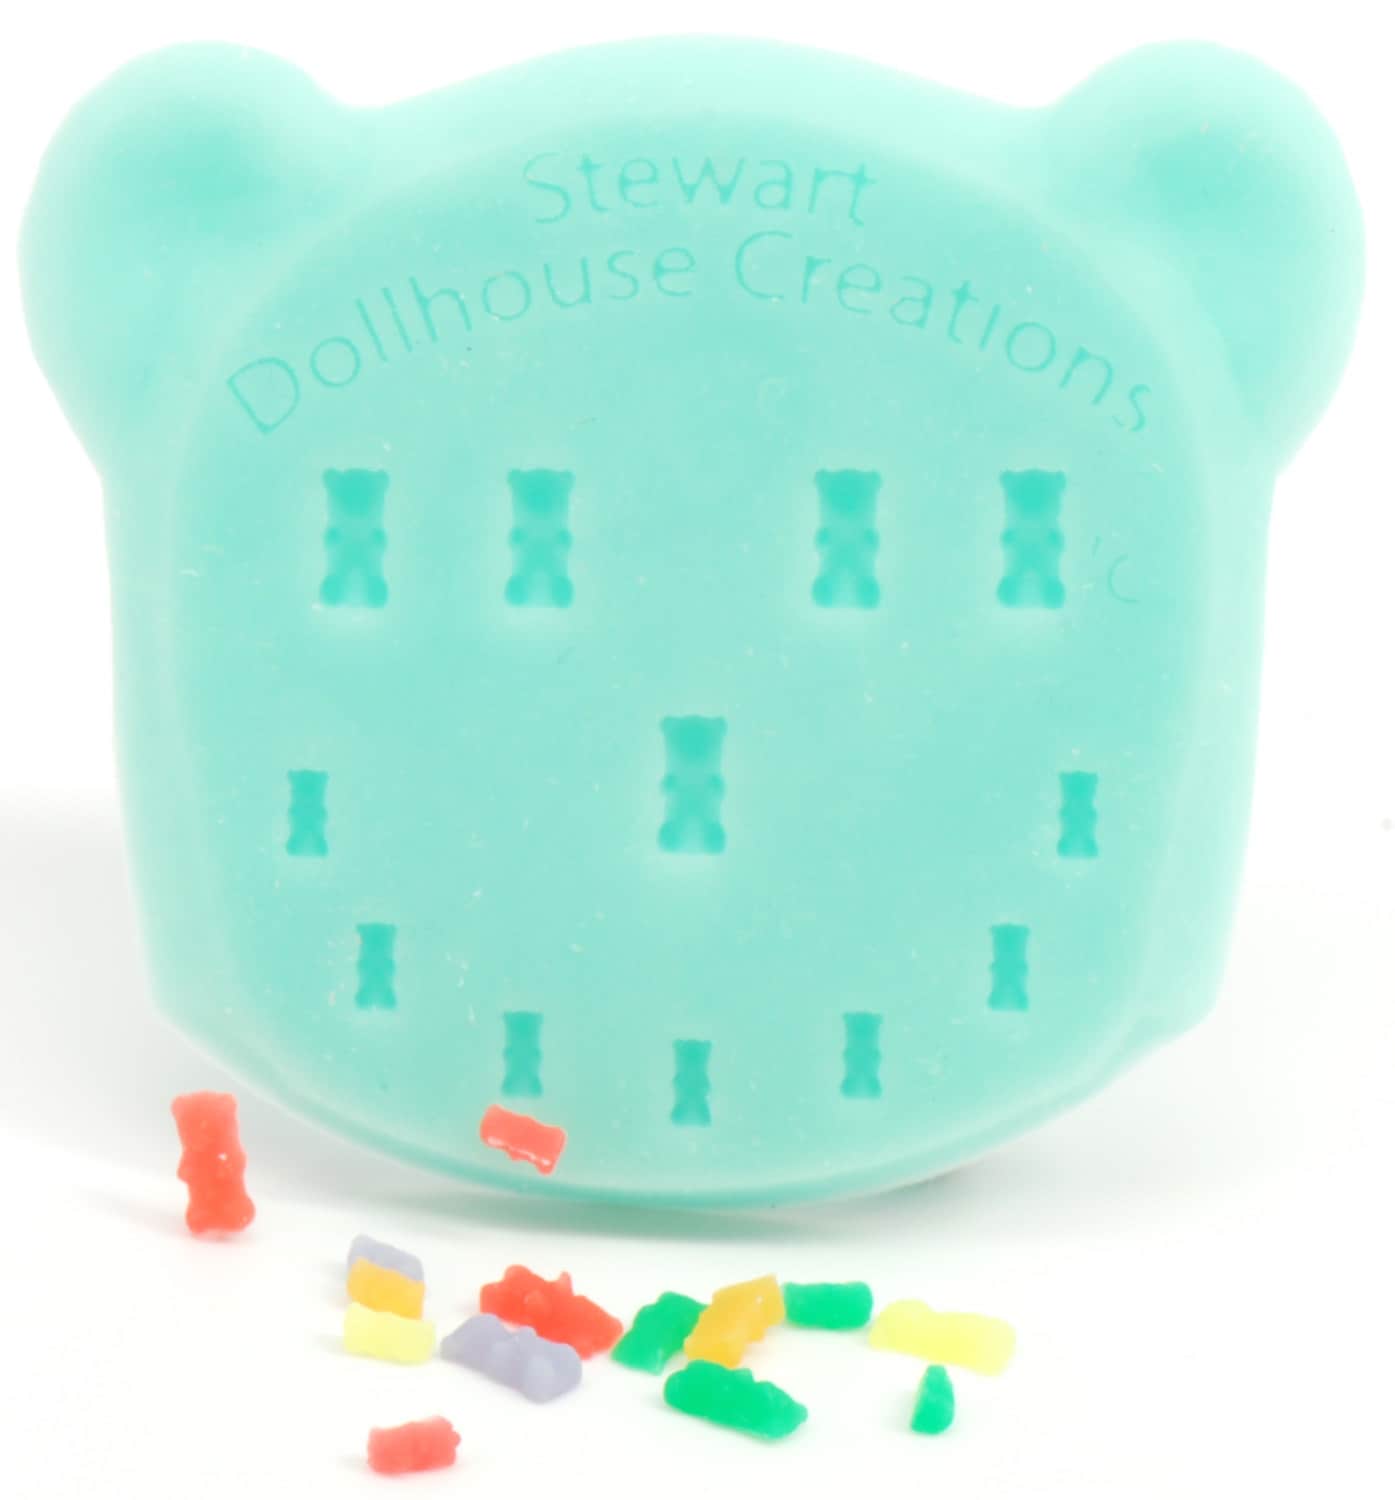  DIY Jumbo Gummy Bear Mold by Mister Gummy  Make Your Own  Medium Sized Gummy Bears, Chocolates, Soaps, Candles, Bath Bombs, Ice, Decor  Bears, Baked Goods, and More! (TWO PACK) 